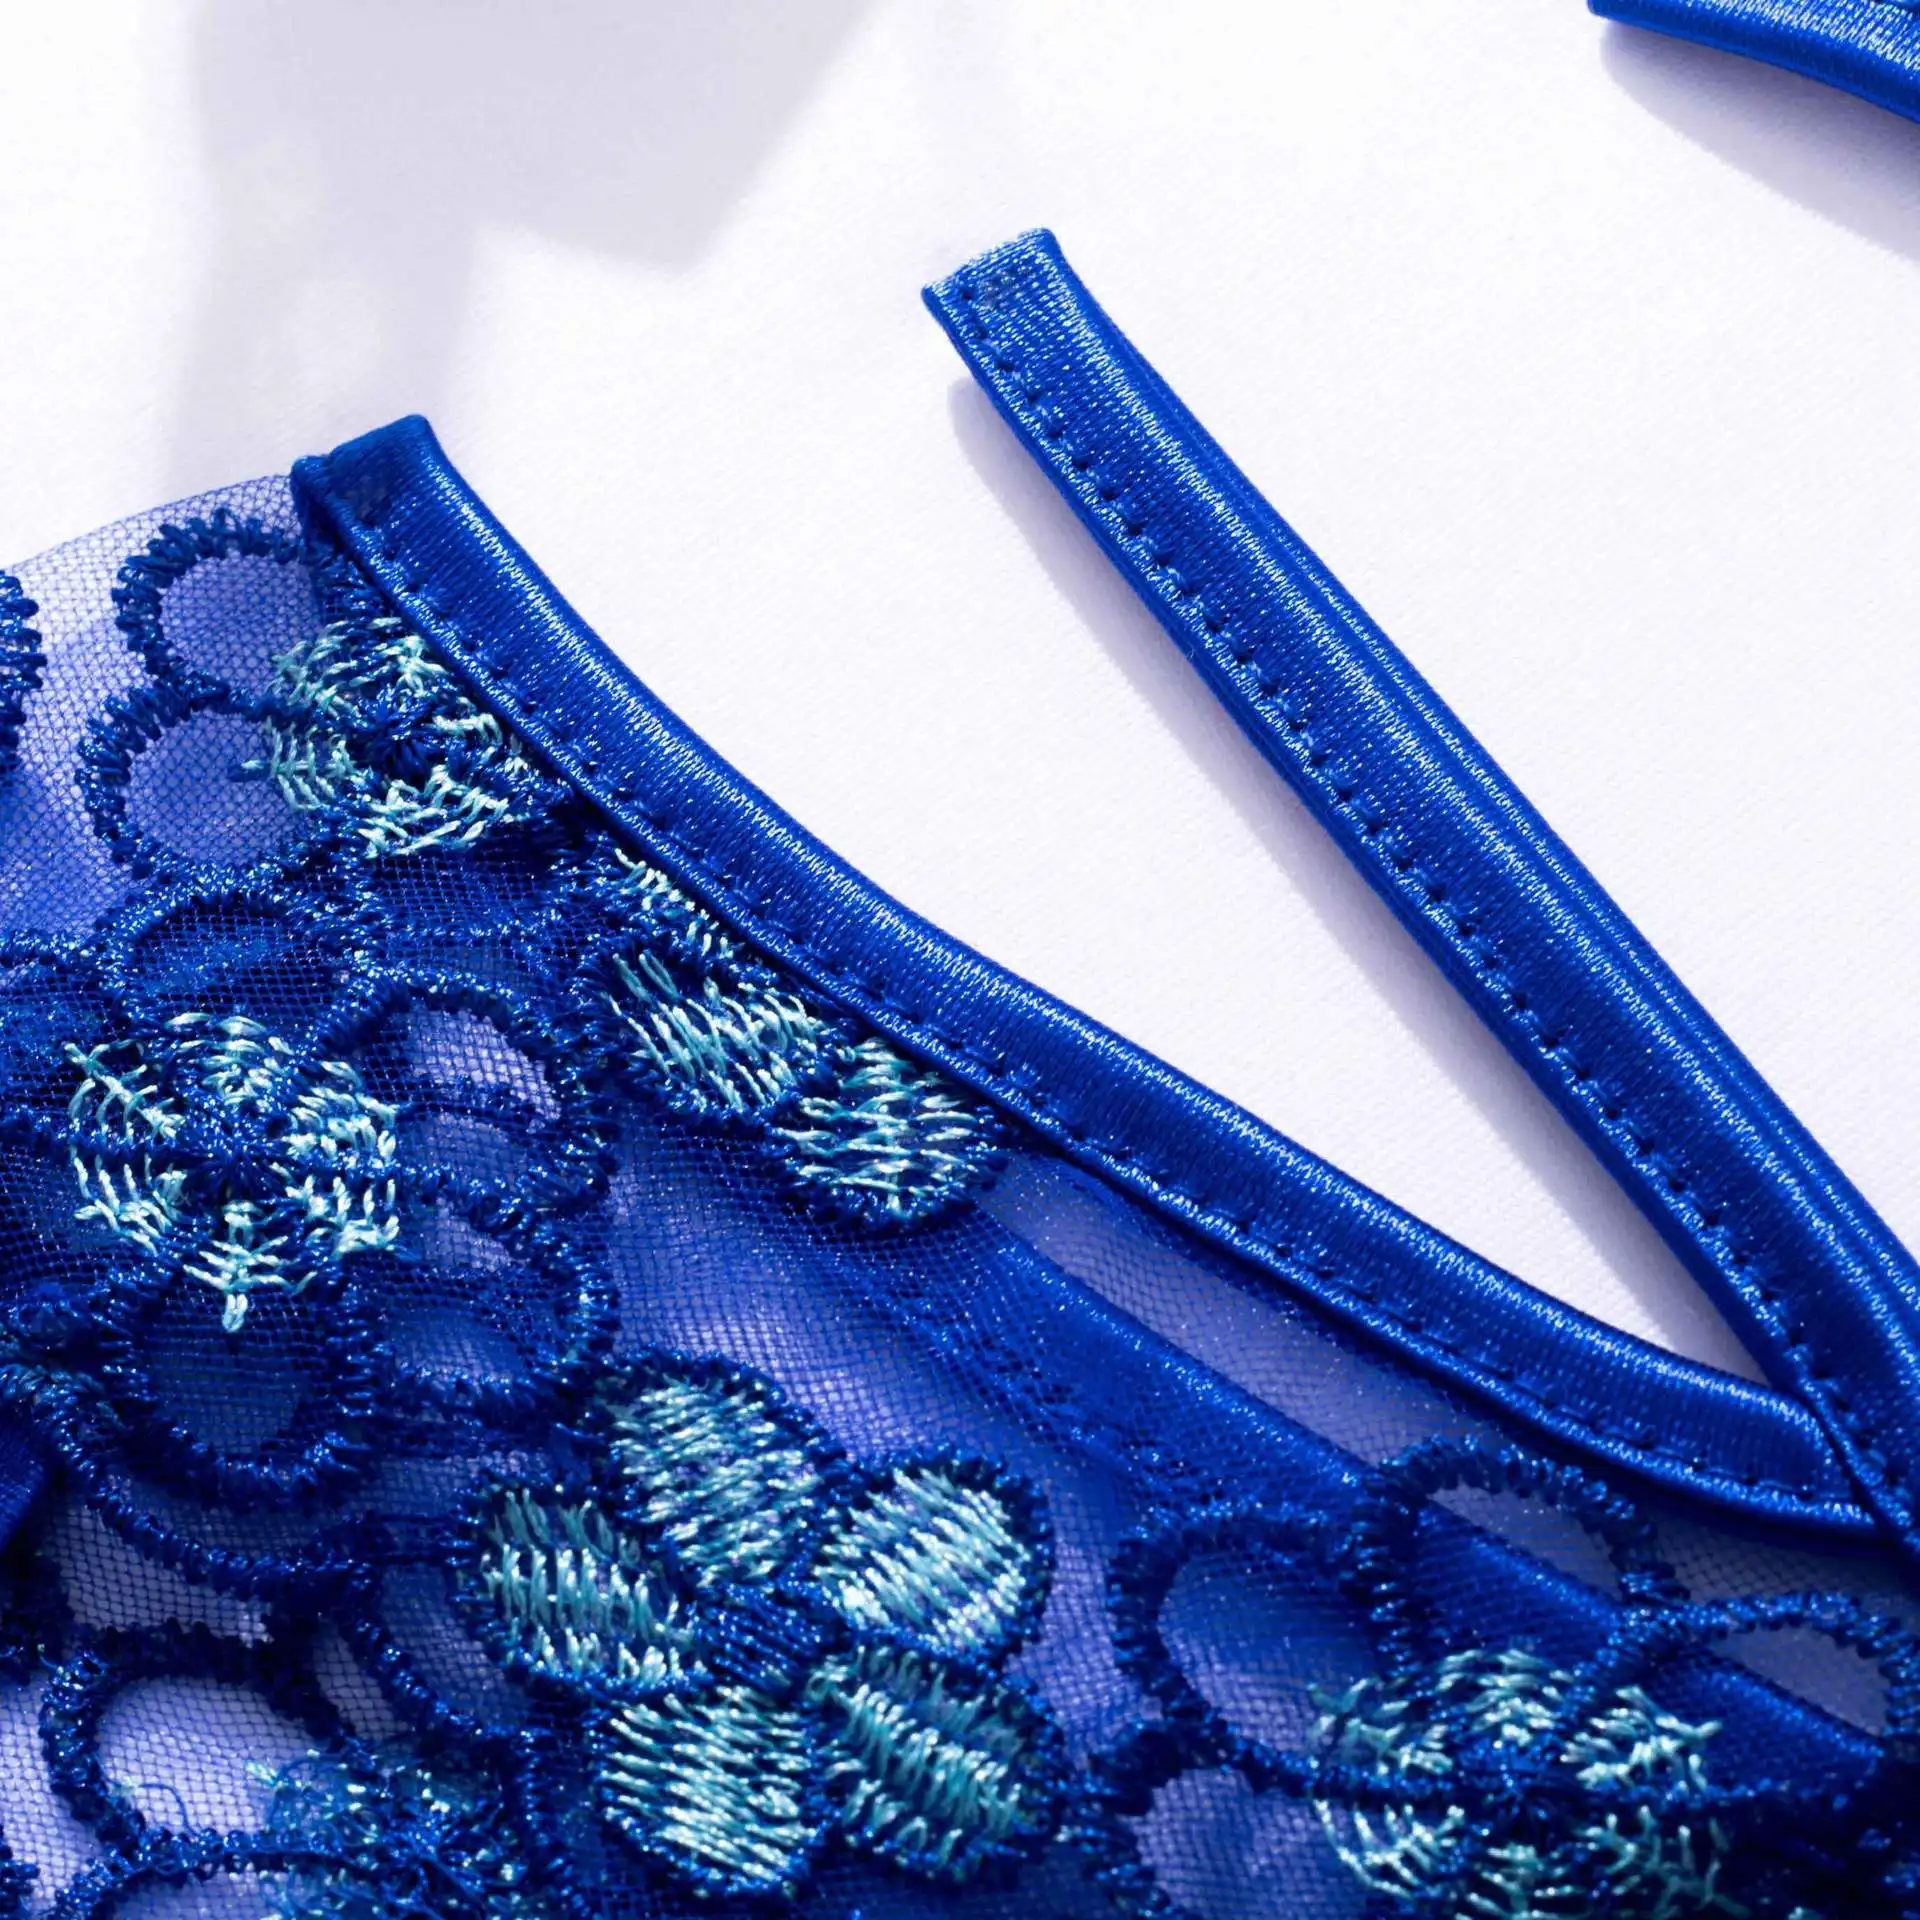 2022 New Arrival Women Sexy Lingerie Lace Sensual Womens Underwear Blue Flowers Embroidery 